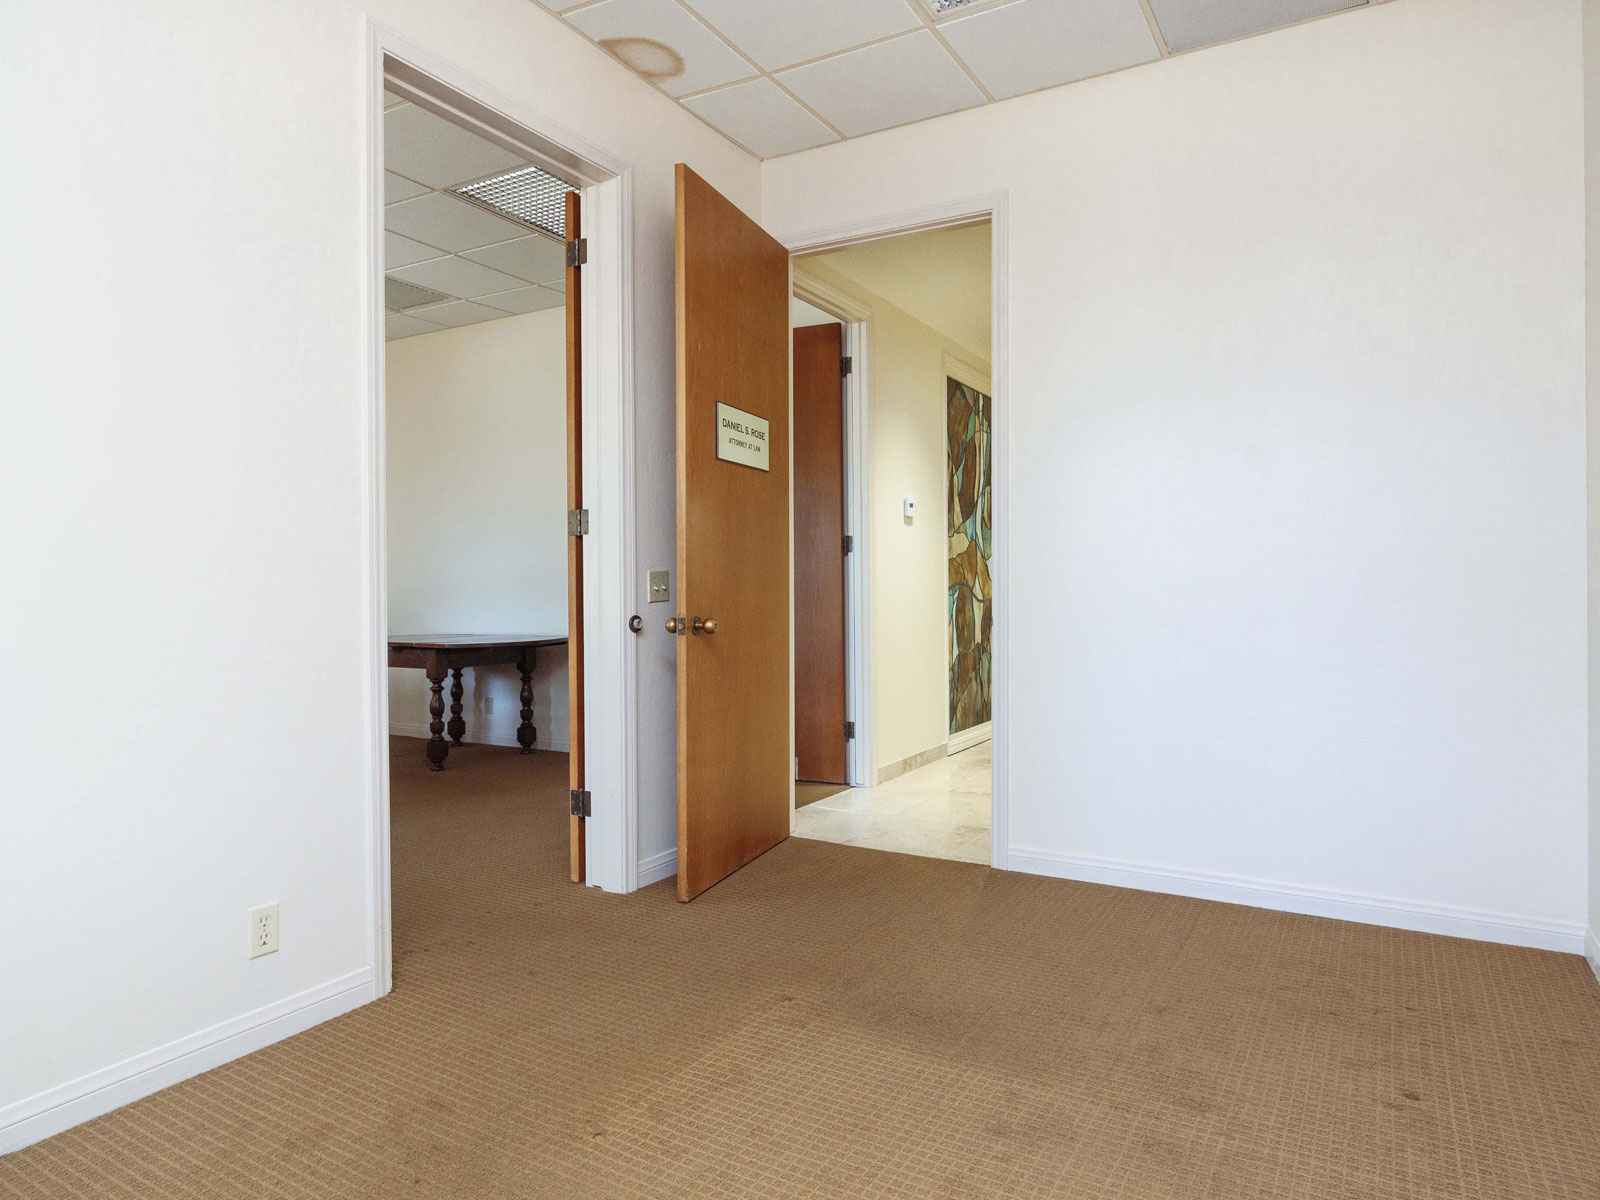 316-s-melrose-vista-ca-professional-office-for-lease-105